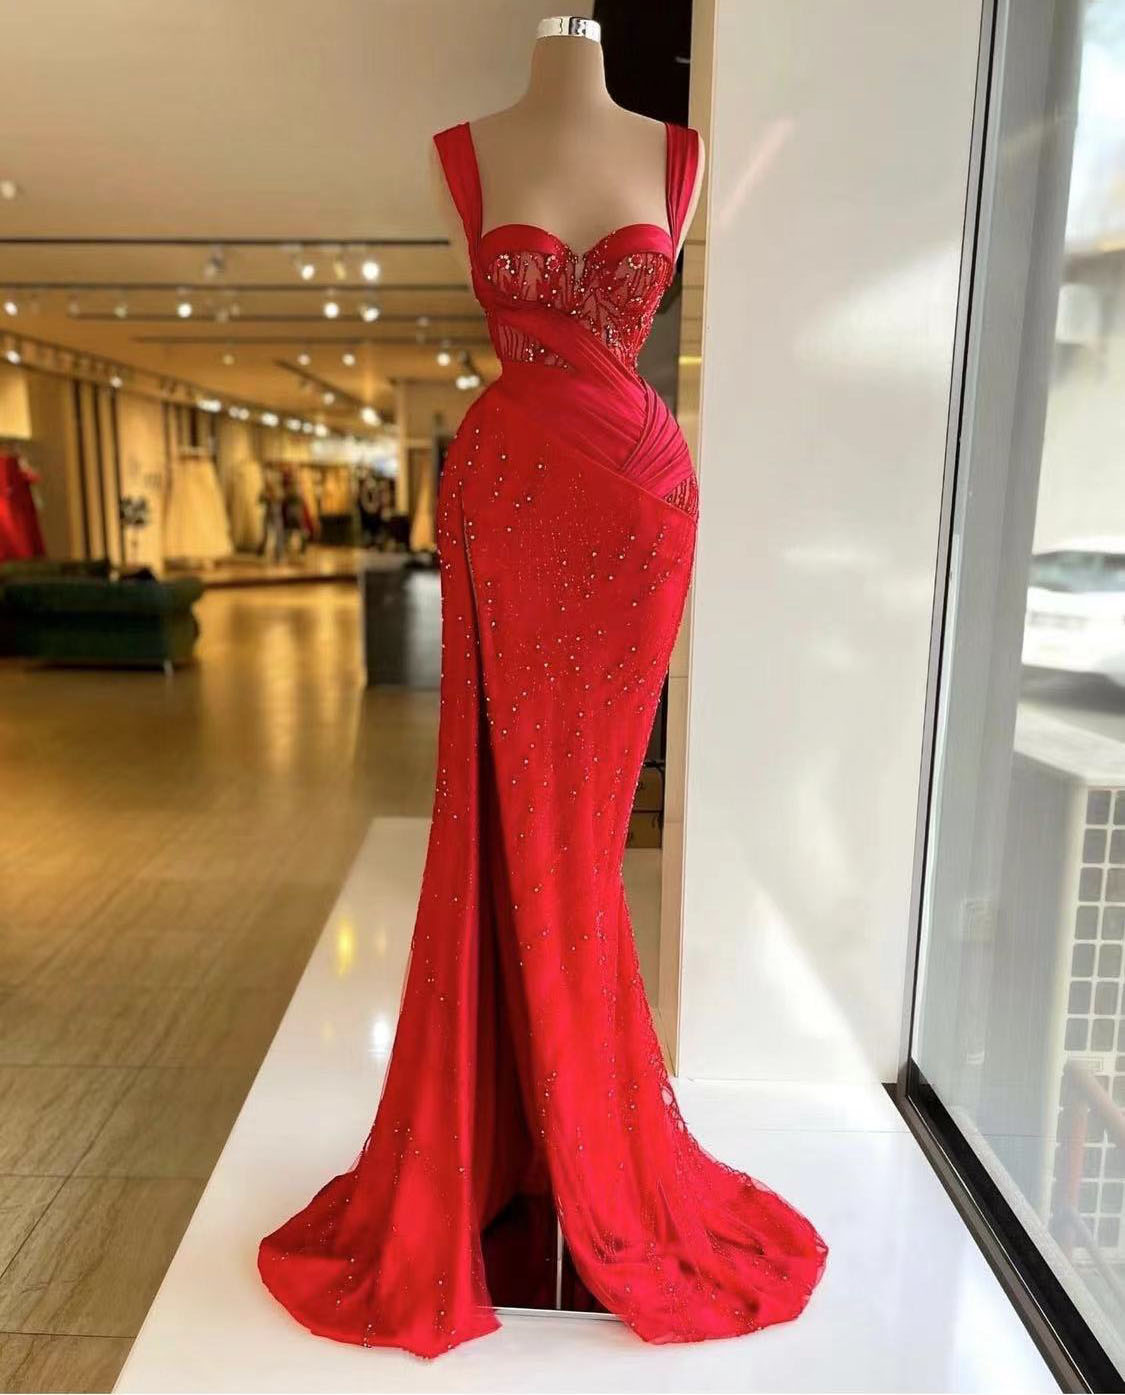 Red Prom Dresses, Lace Prom Dresses, Beaded Prom Dresses, Sweetheart Prom Dresses, Side Slit Prom Dresses, Arabic Prom Dresses, Evening